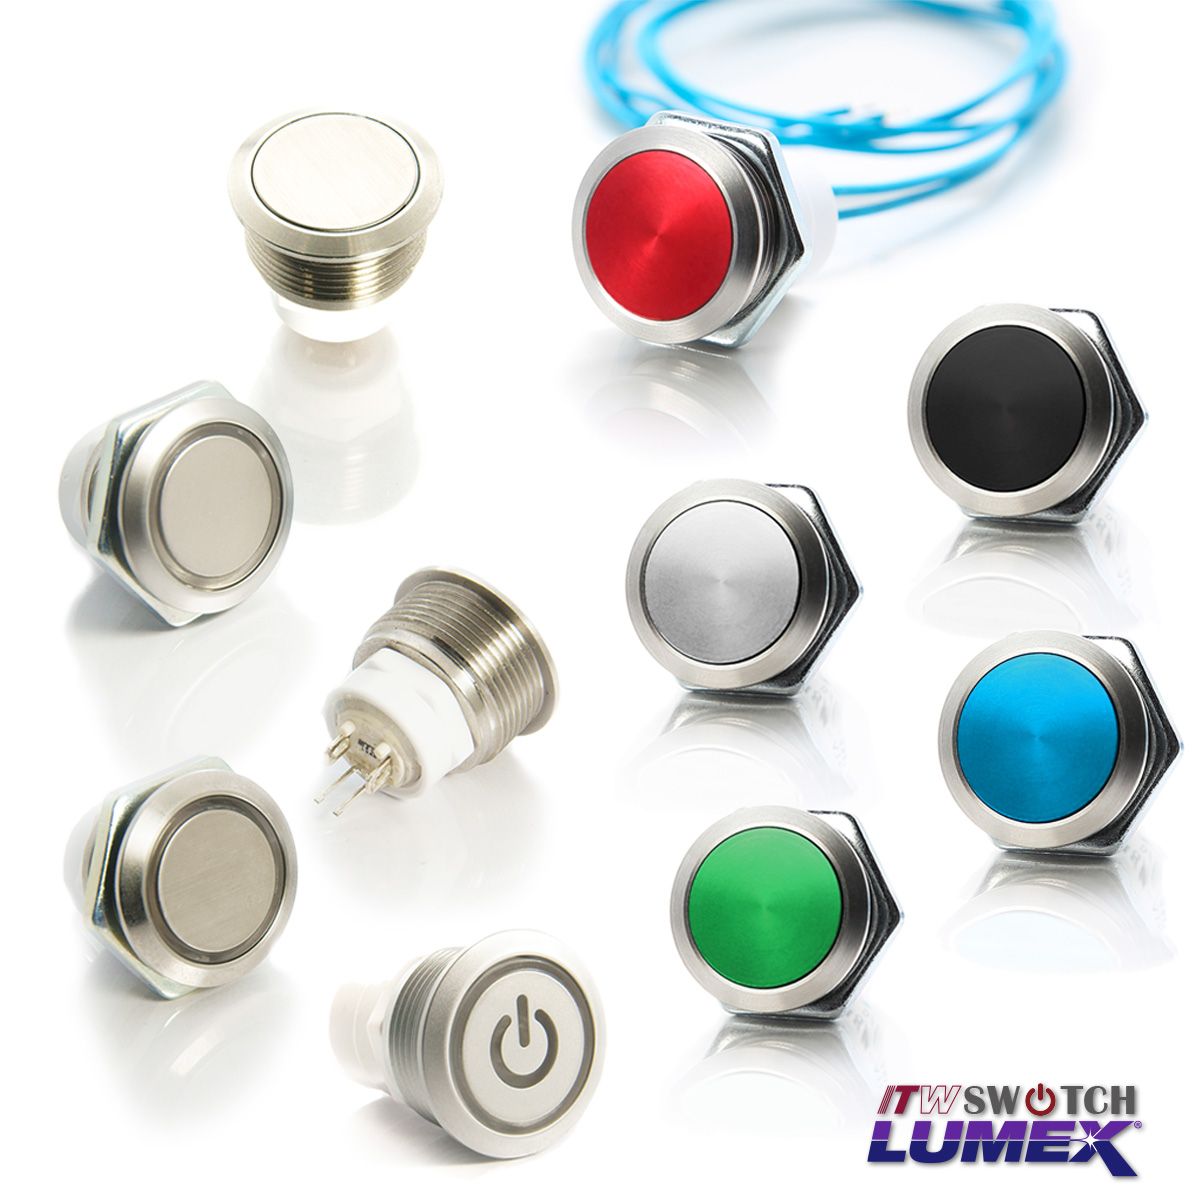 ITW Lumex Switch offers push button switches with different design options, all of which feature a 19mm panel cutout.